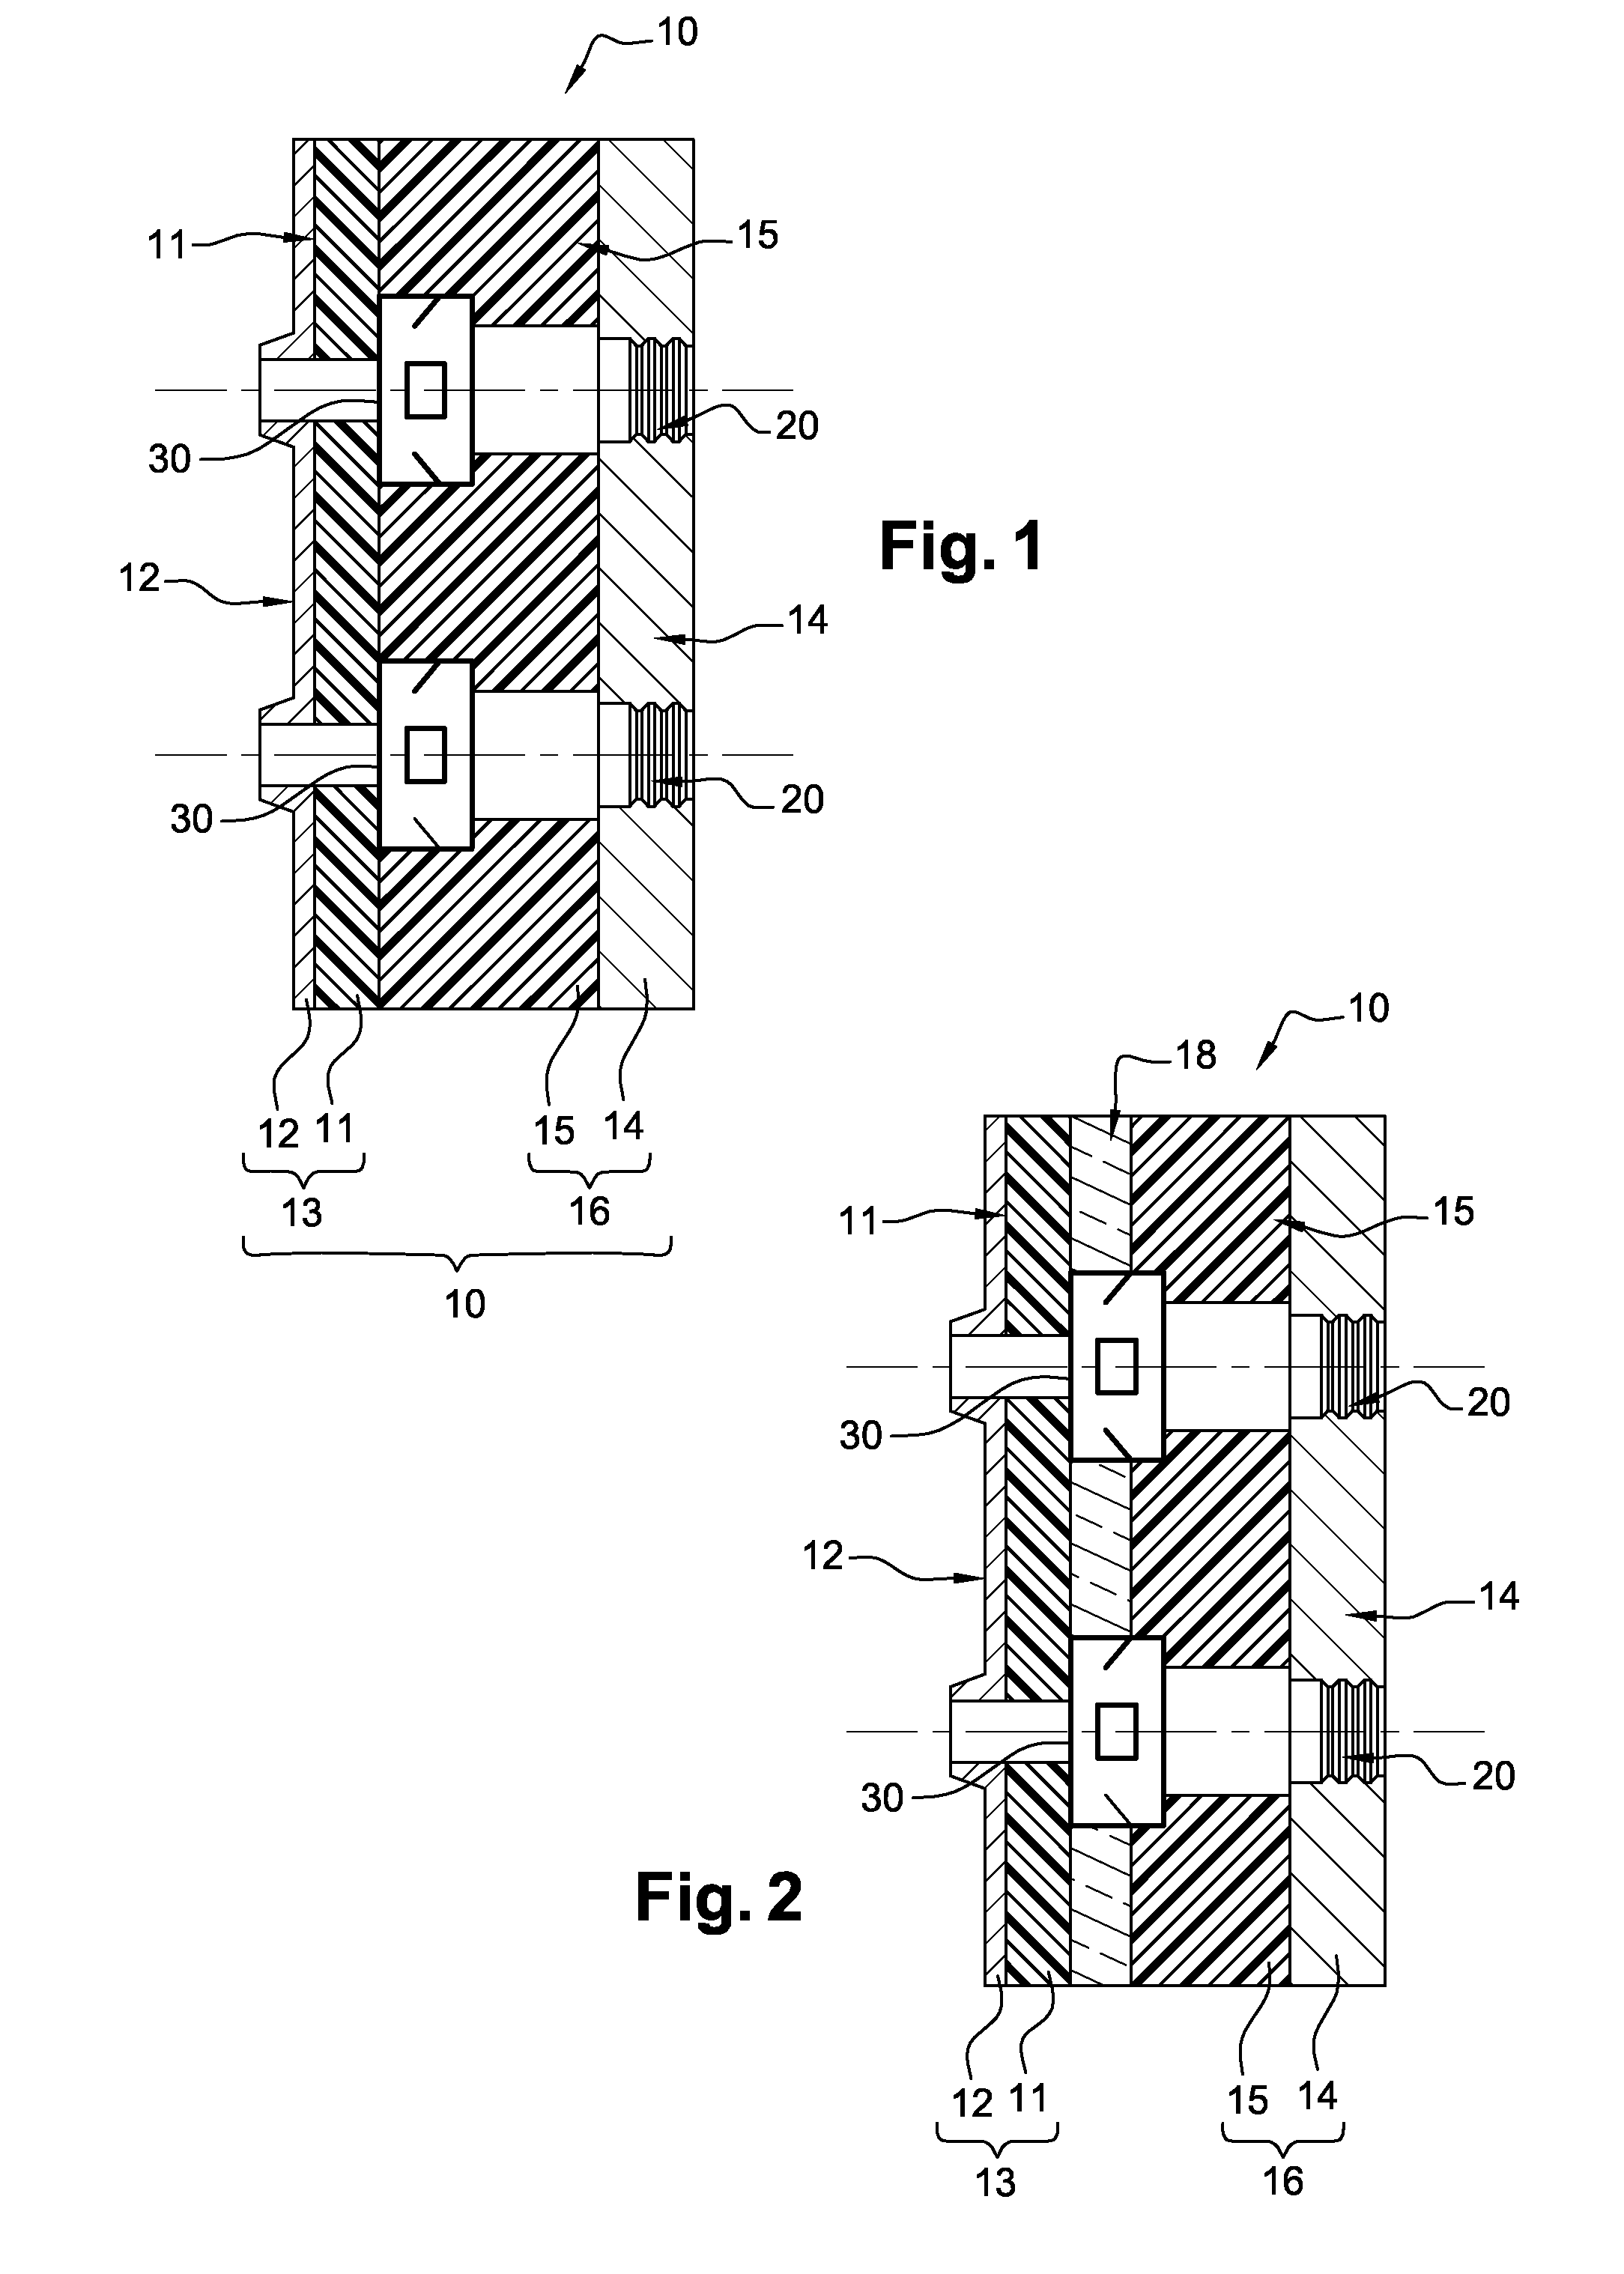 Electrical connector with flame-resistant inserts